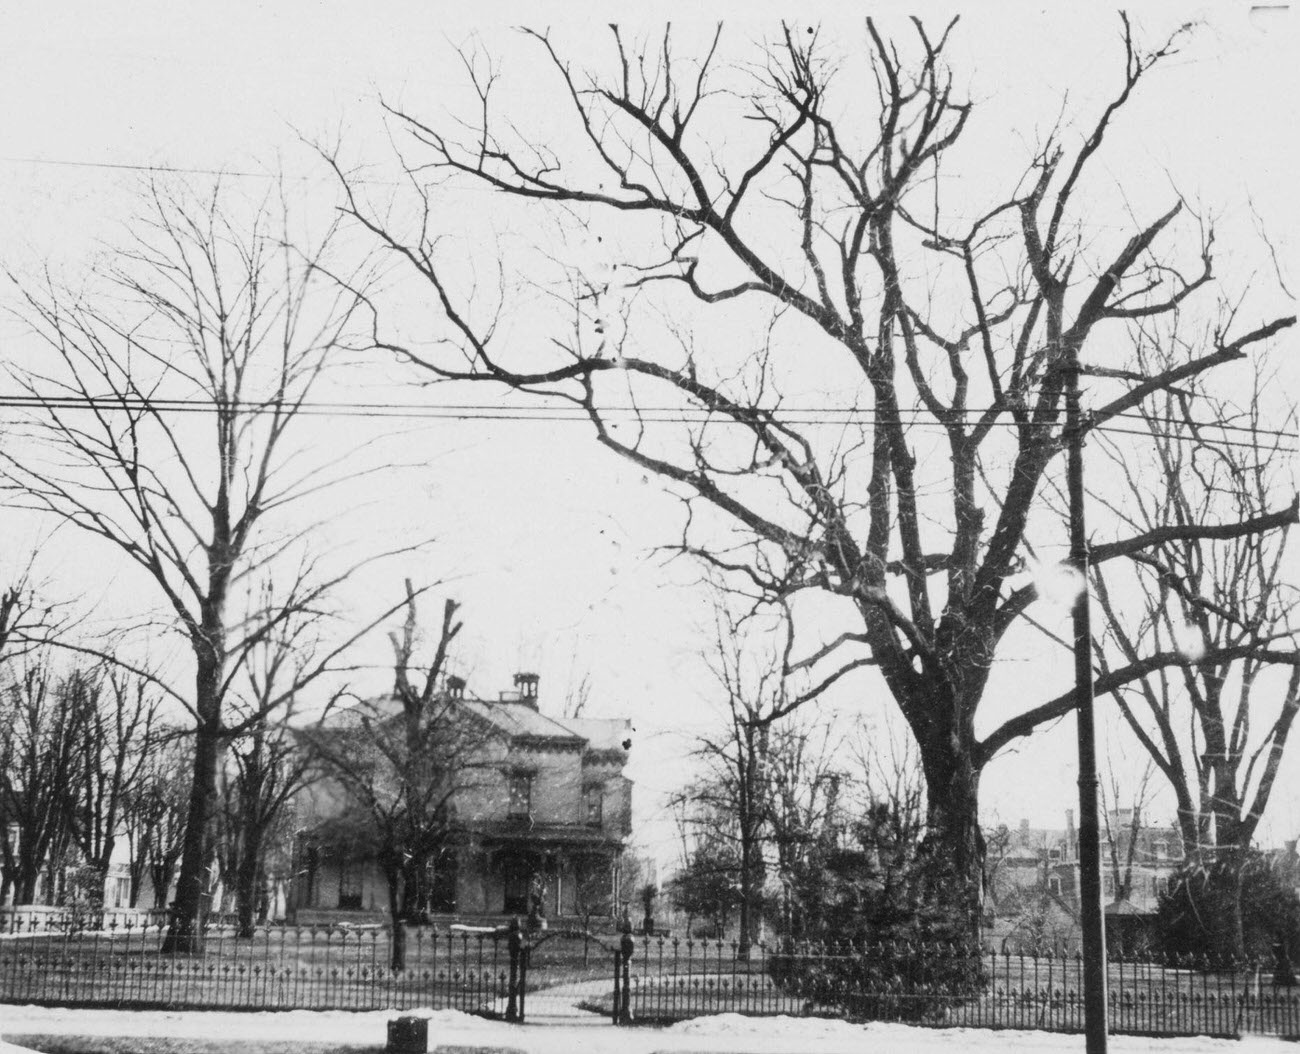 Flatbush Avenue Entrance To Prospect Park, Mount Prospect Water Tower On Eastern Parkway, Brooklyn, 1913